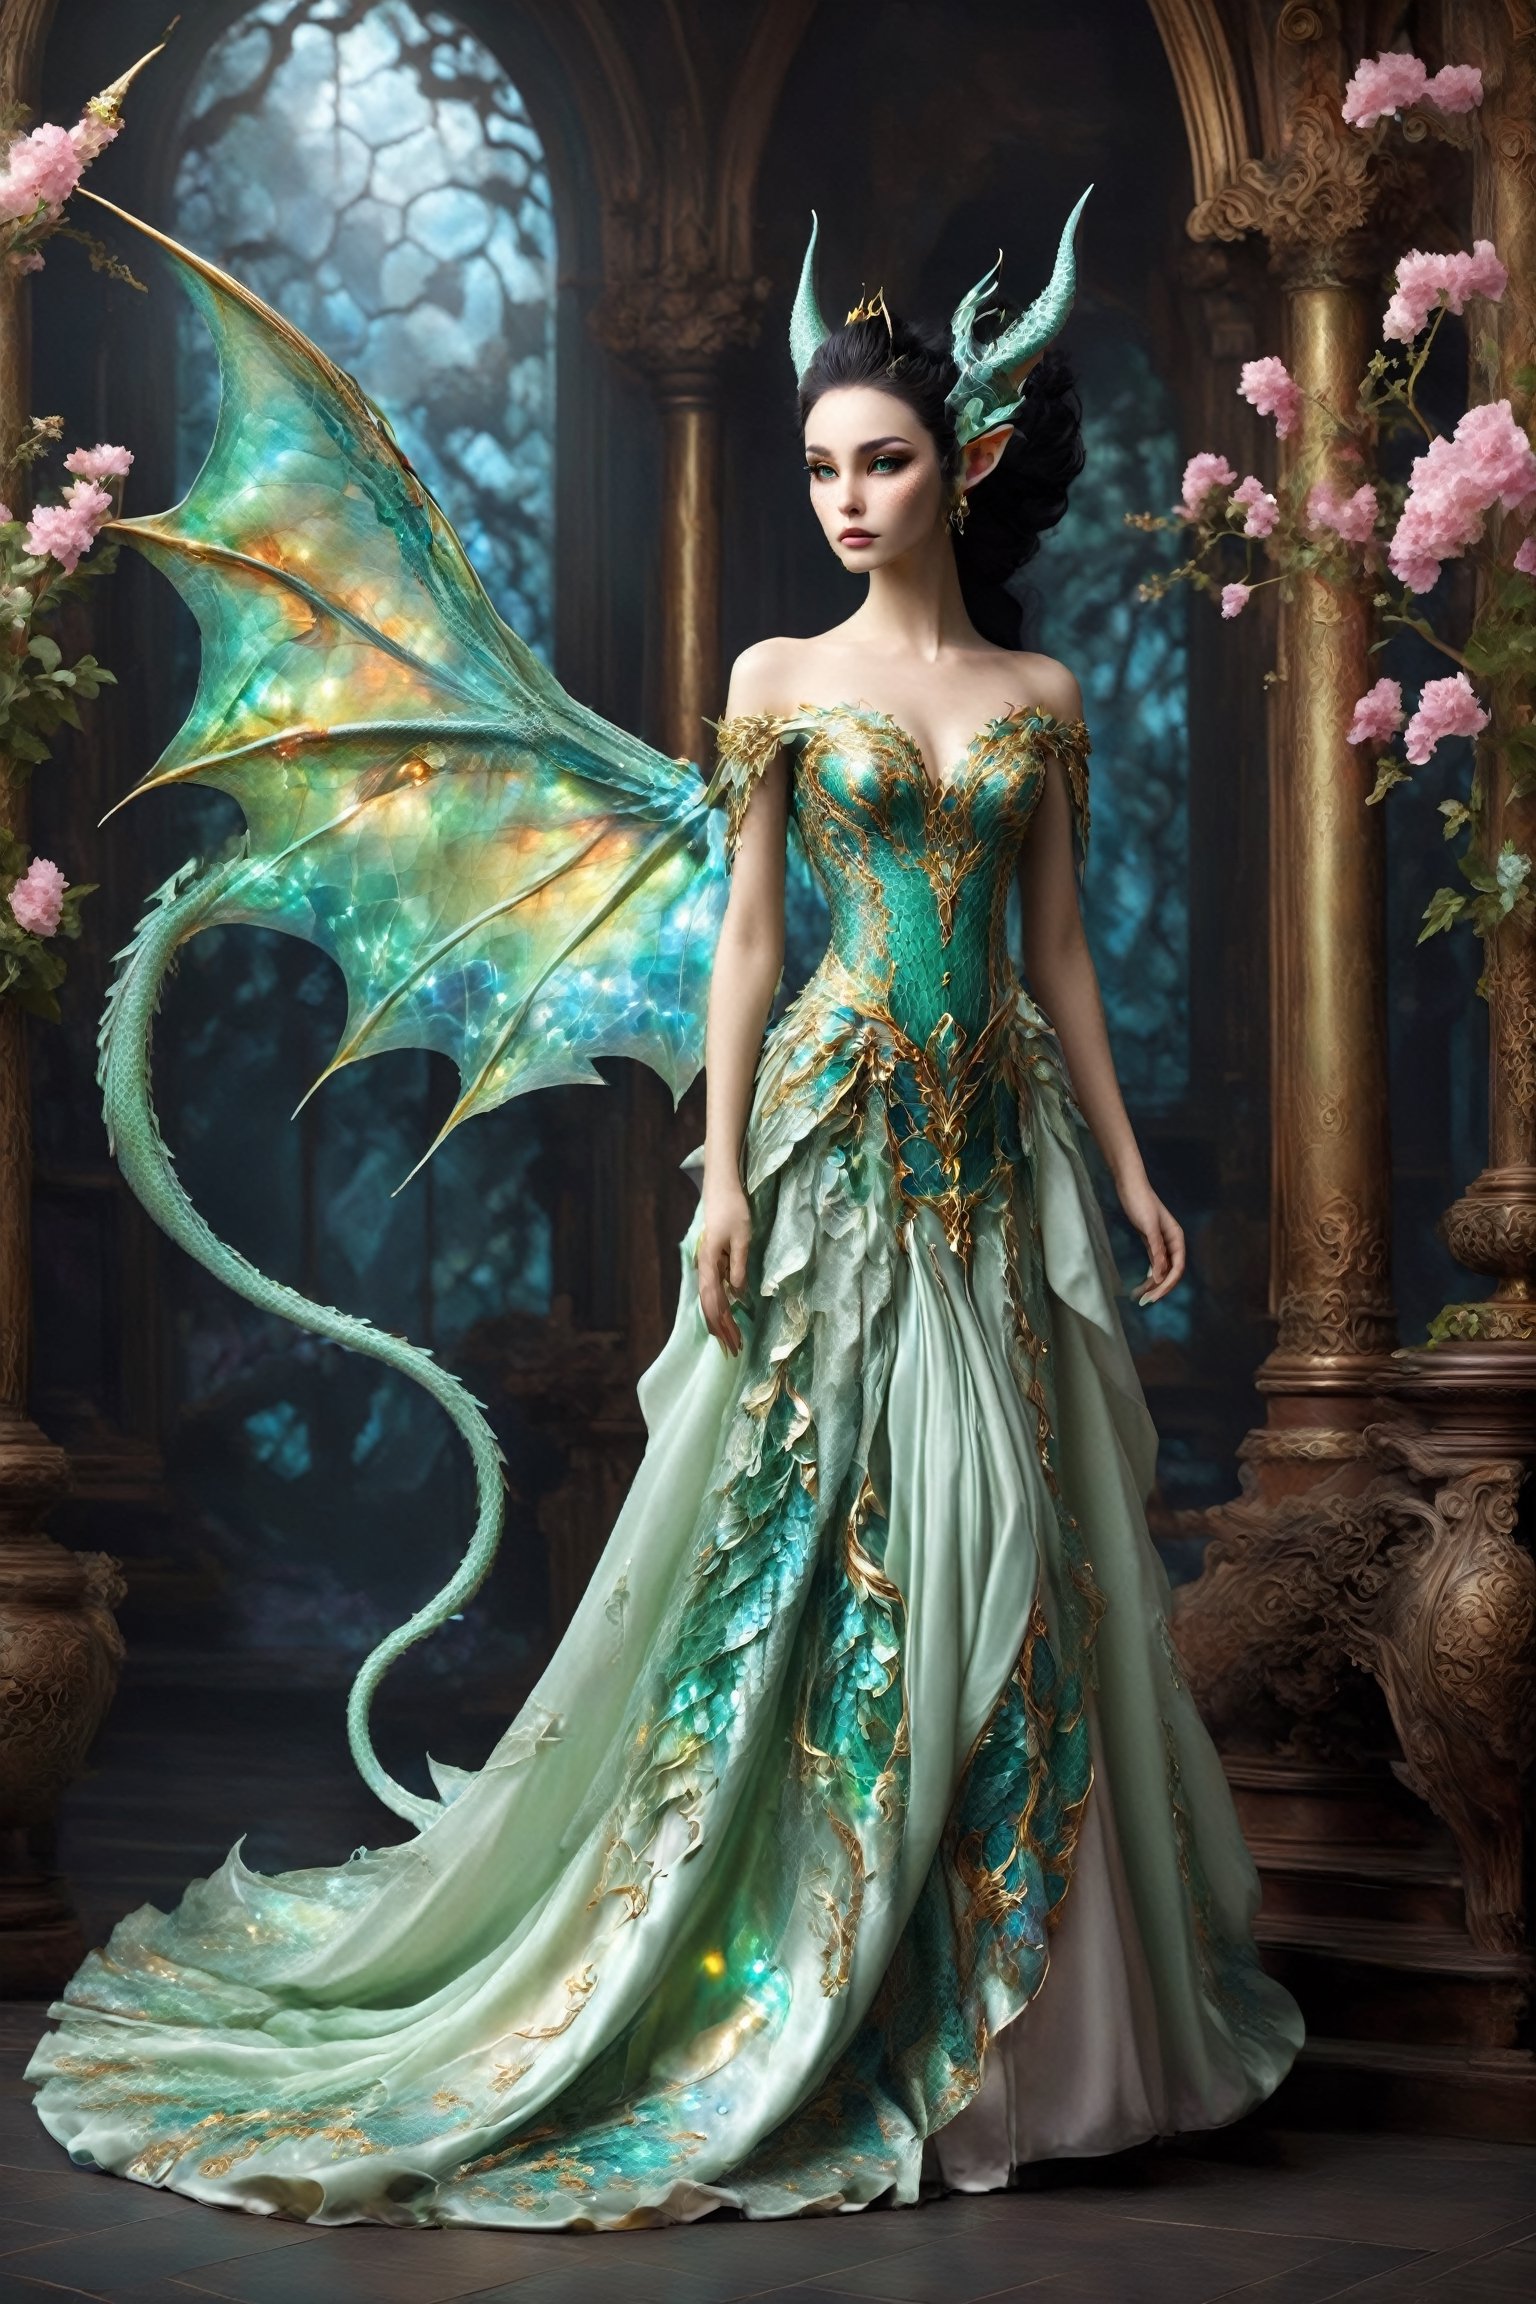 alabaster skin, mystical being, born of the union between a dragon and an elf girl,elf ears,Dragon inspired dress,extraordinary creature exhibits both draconic and elven features, blending the elegance of the elves with the majestic presence of dragons. Its scales might shimmer with ethereal colors, and its pointed ears showcase the elven heritage. This hybrid being represents the harmonious fusion of two fantastical worlds, embodying a unique and captivating presence.,DonM3lv3sXL,Disney pixar style